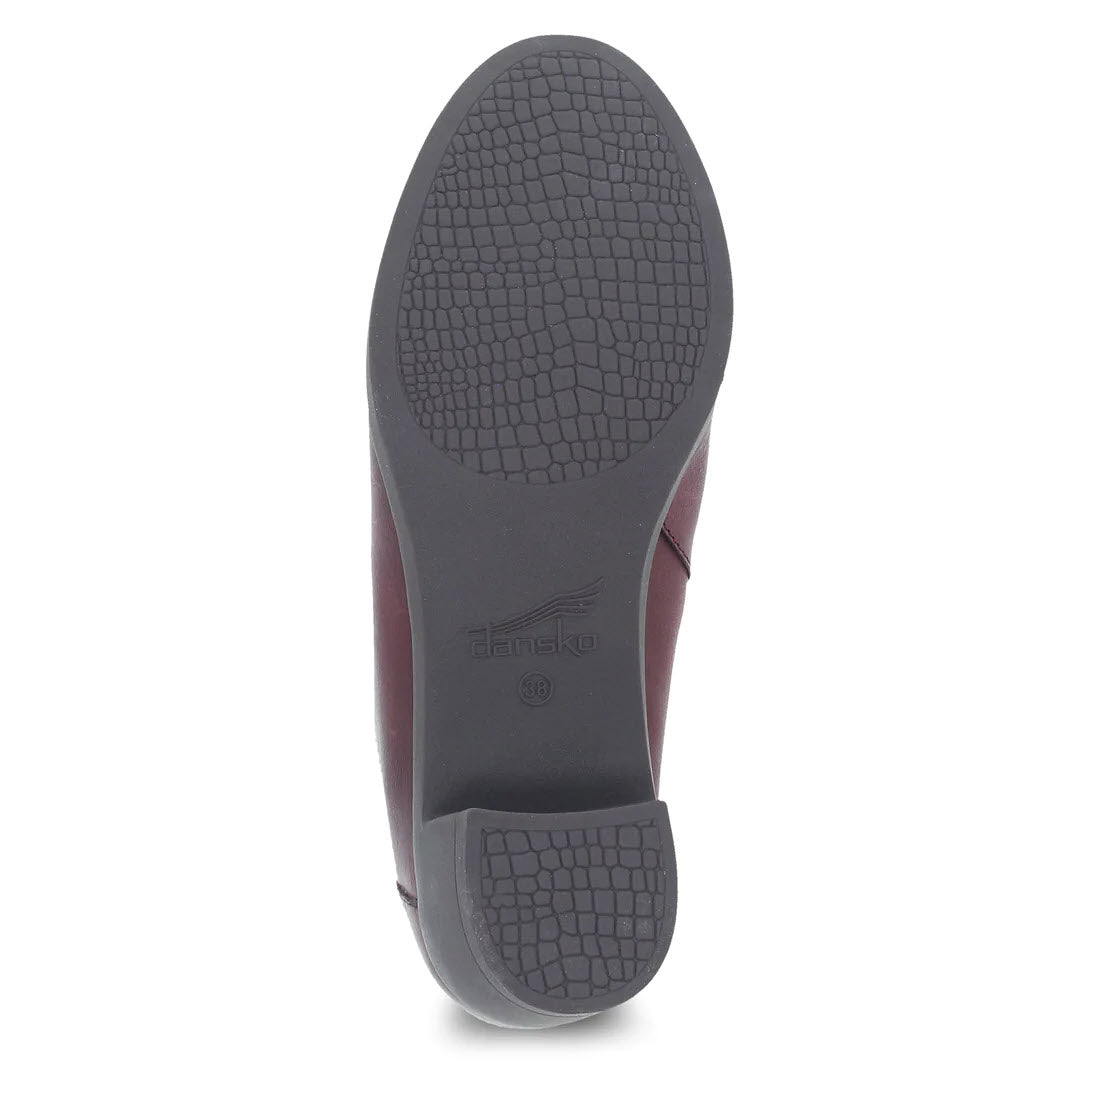 Bottom view of a Dansko Carrie Wine Burnished shoe featuring the tread pattern, logo on the sole, and highlighting the Dansko Natural Arch® technology.